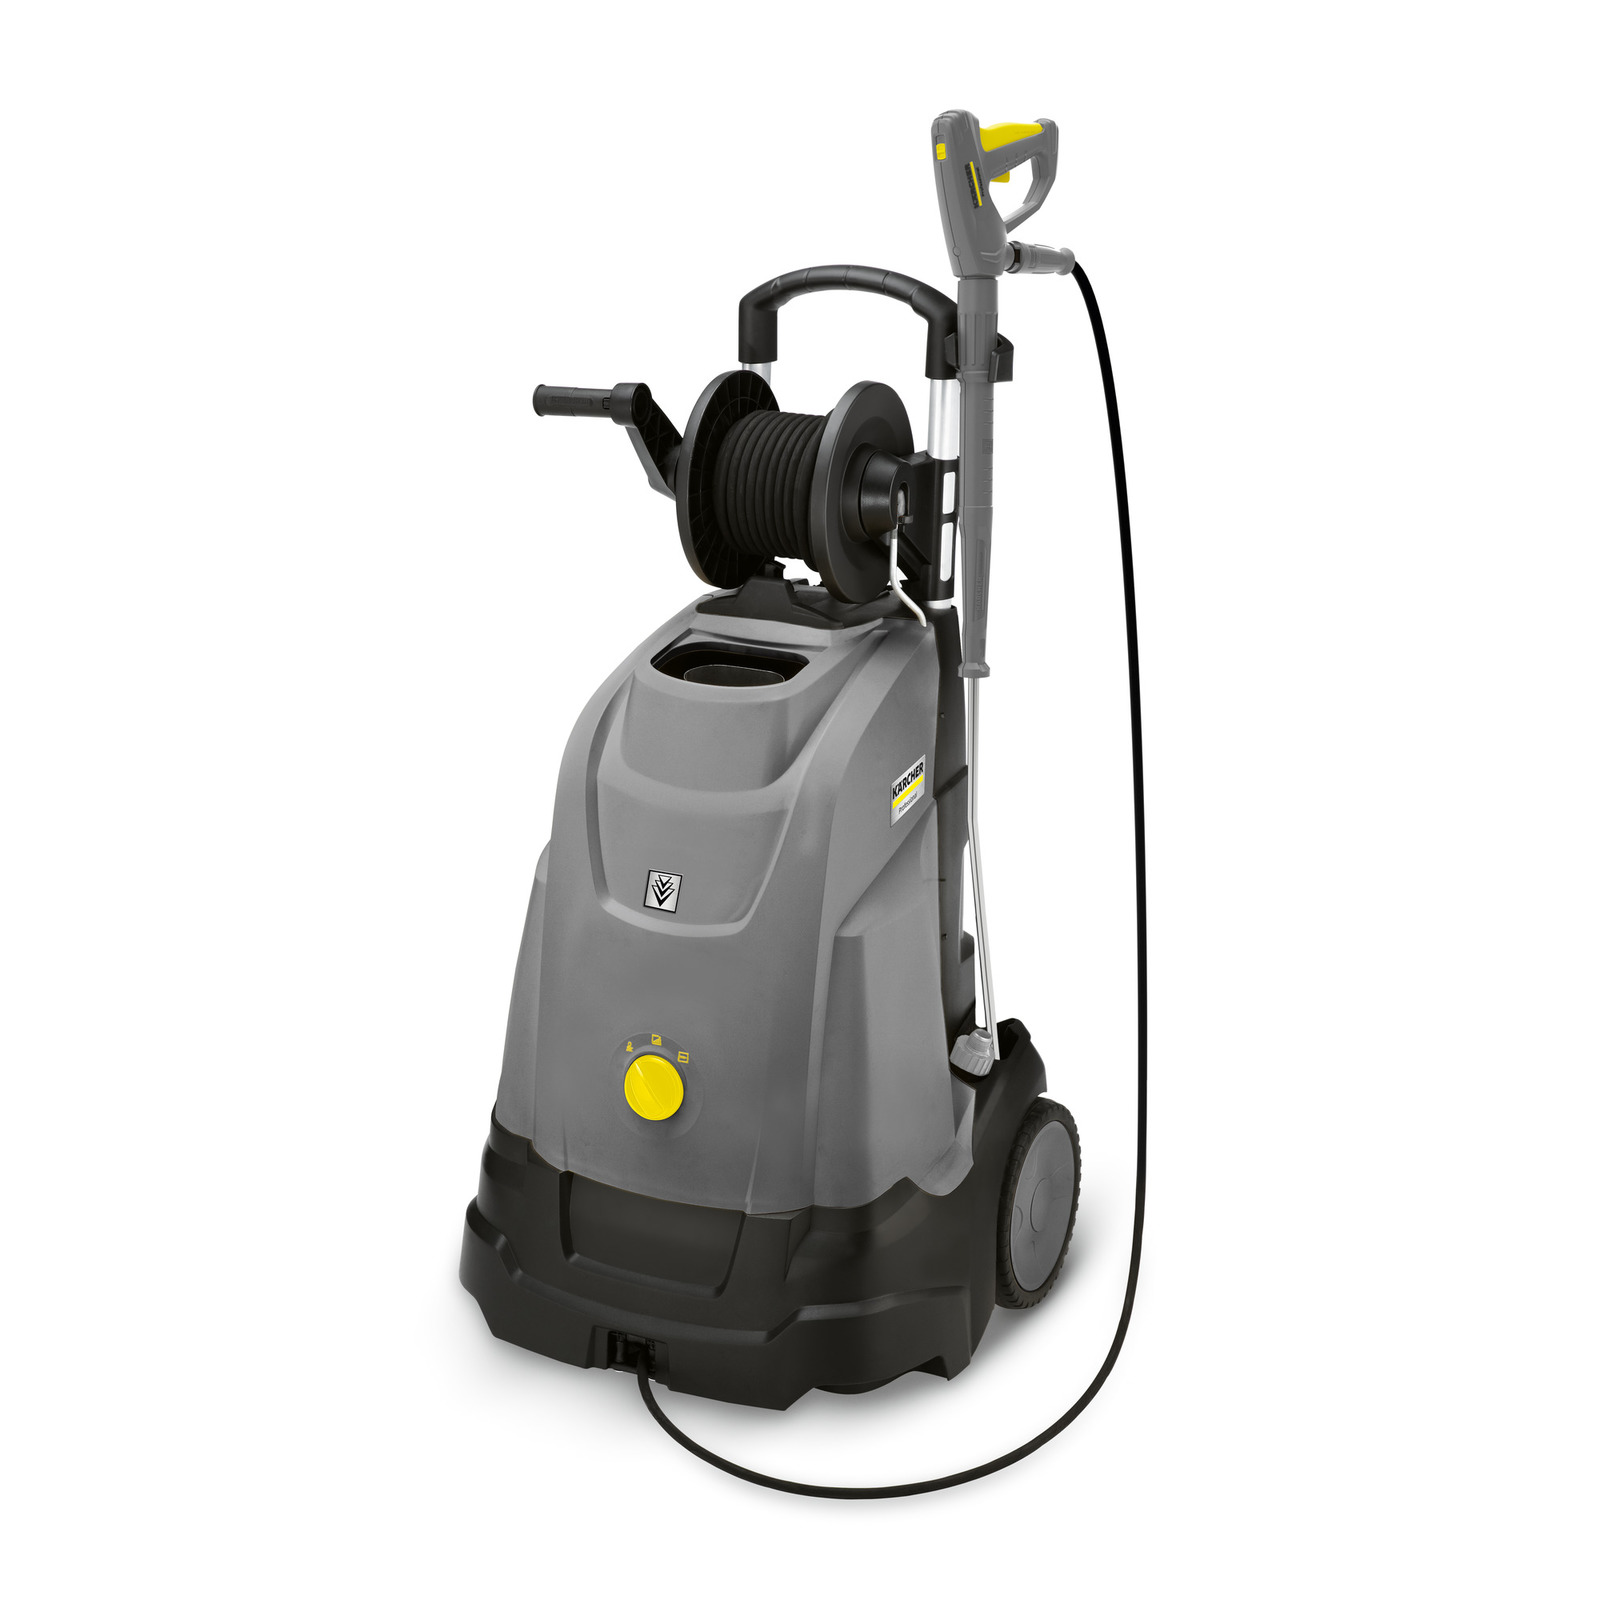 2017 On Pressure Washer 15mtr KARCHER HD HDS 400 bar 2 WIRE 5/16 HOSE New Style 